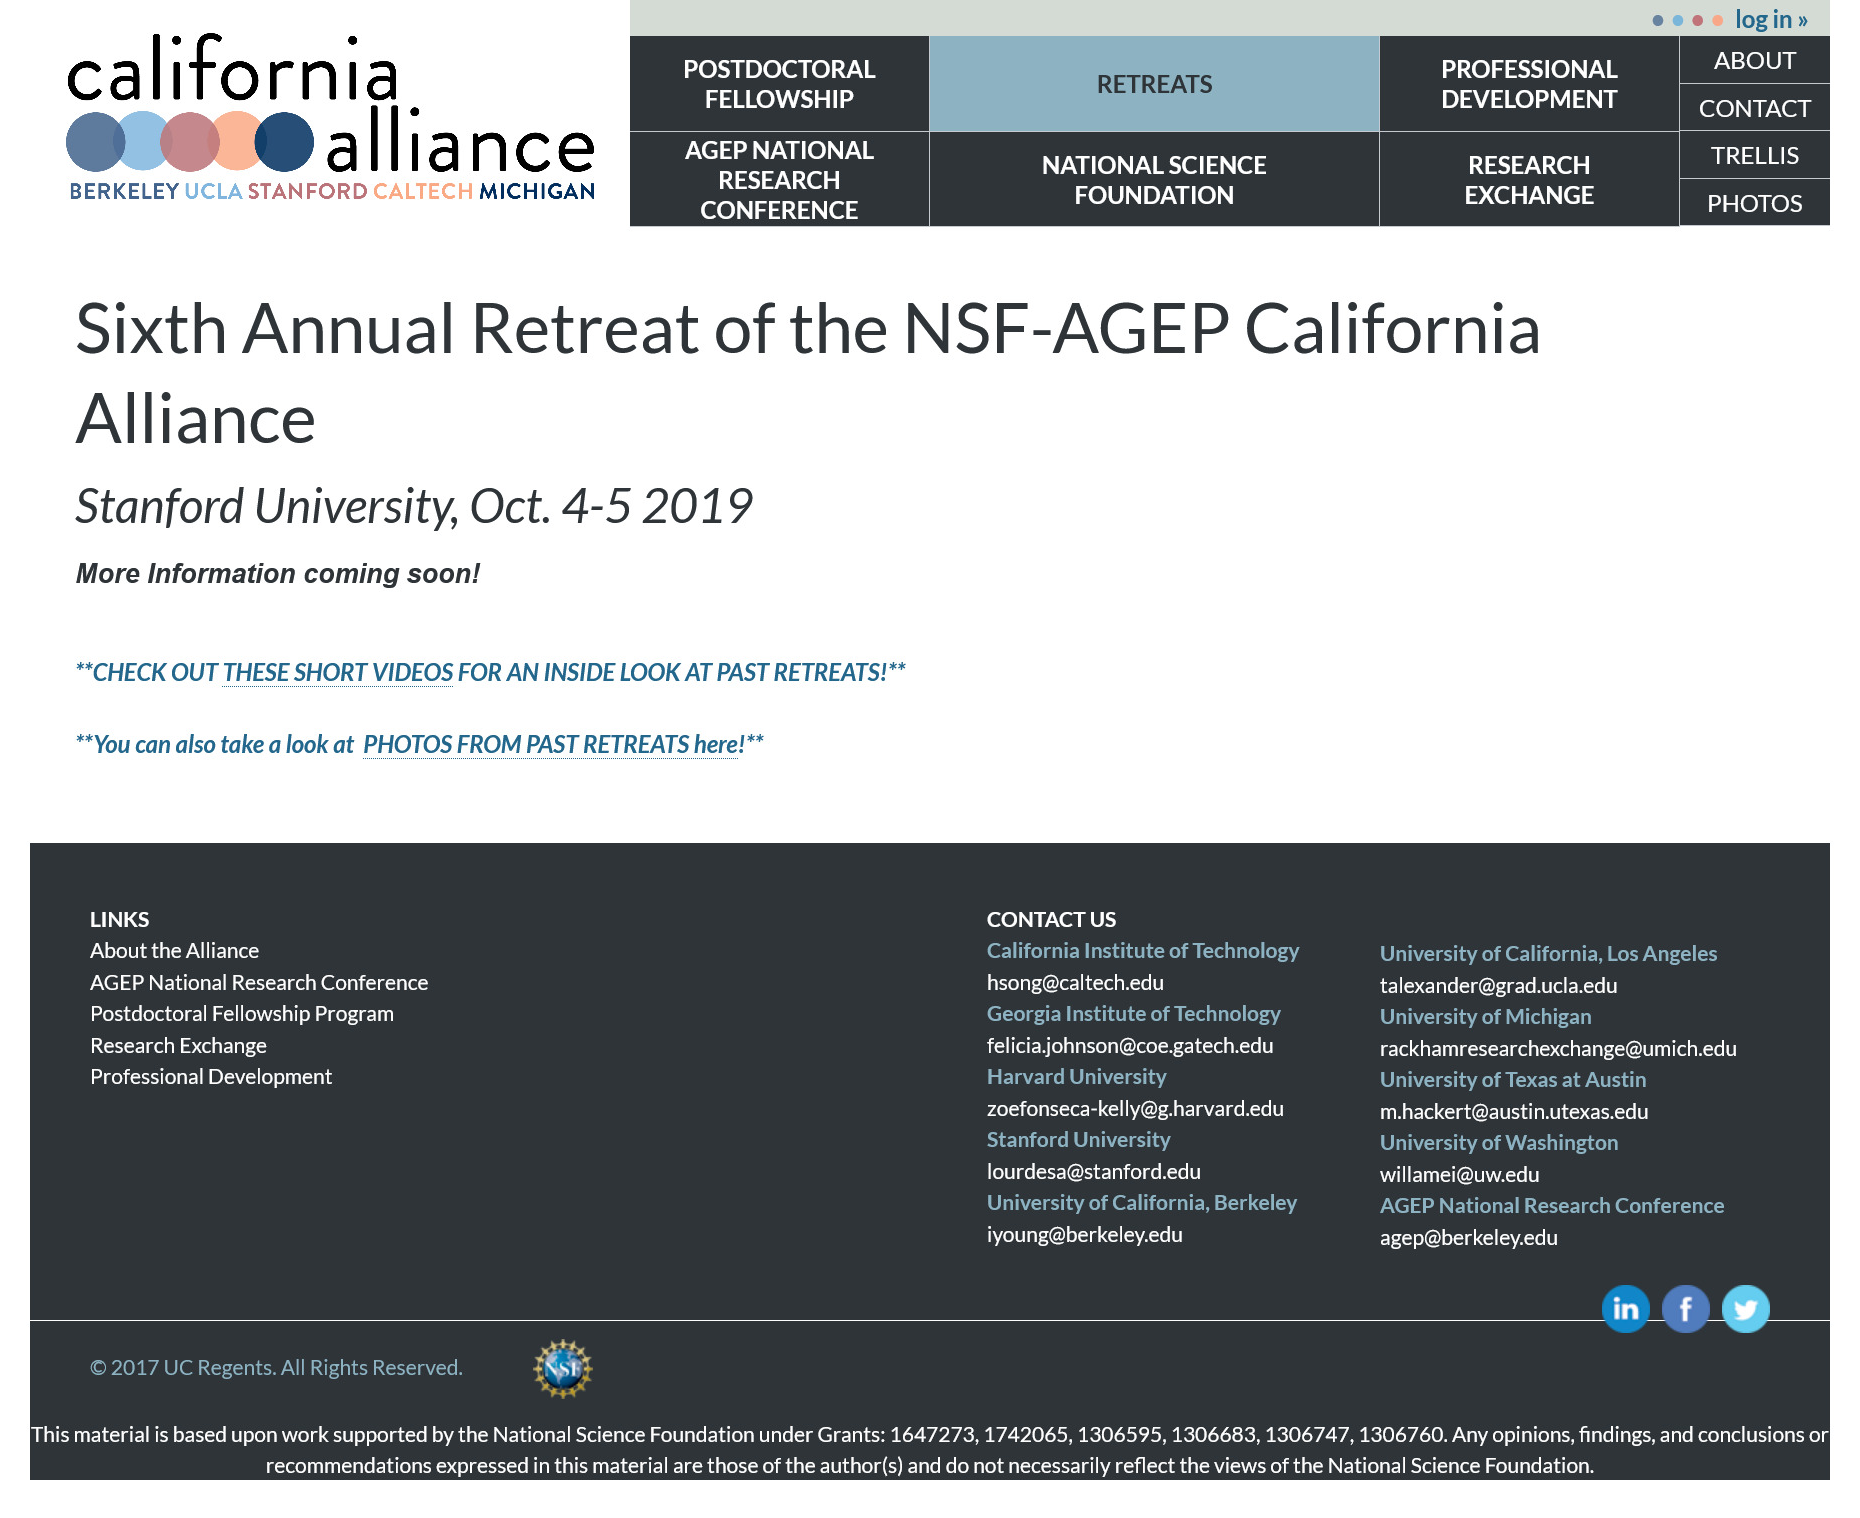 Image is a screen capture of California Alliance.org Retreat Page for archival purposes. Image includes copy from the about page and time based announcements that are now outdated.